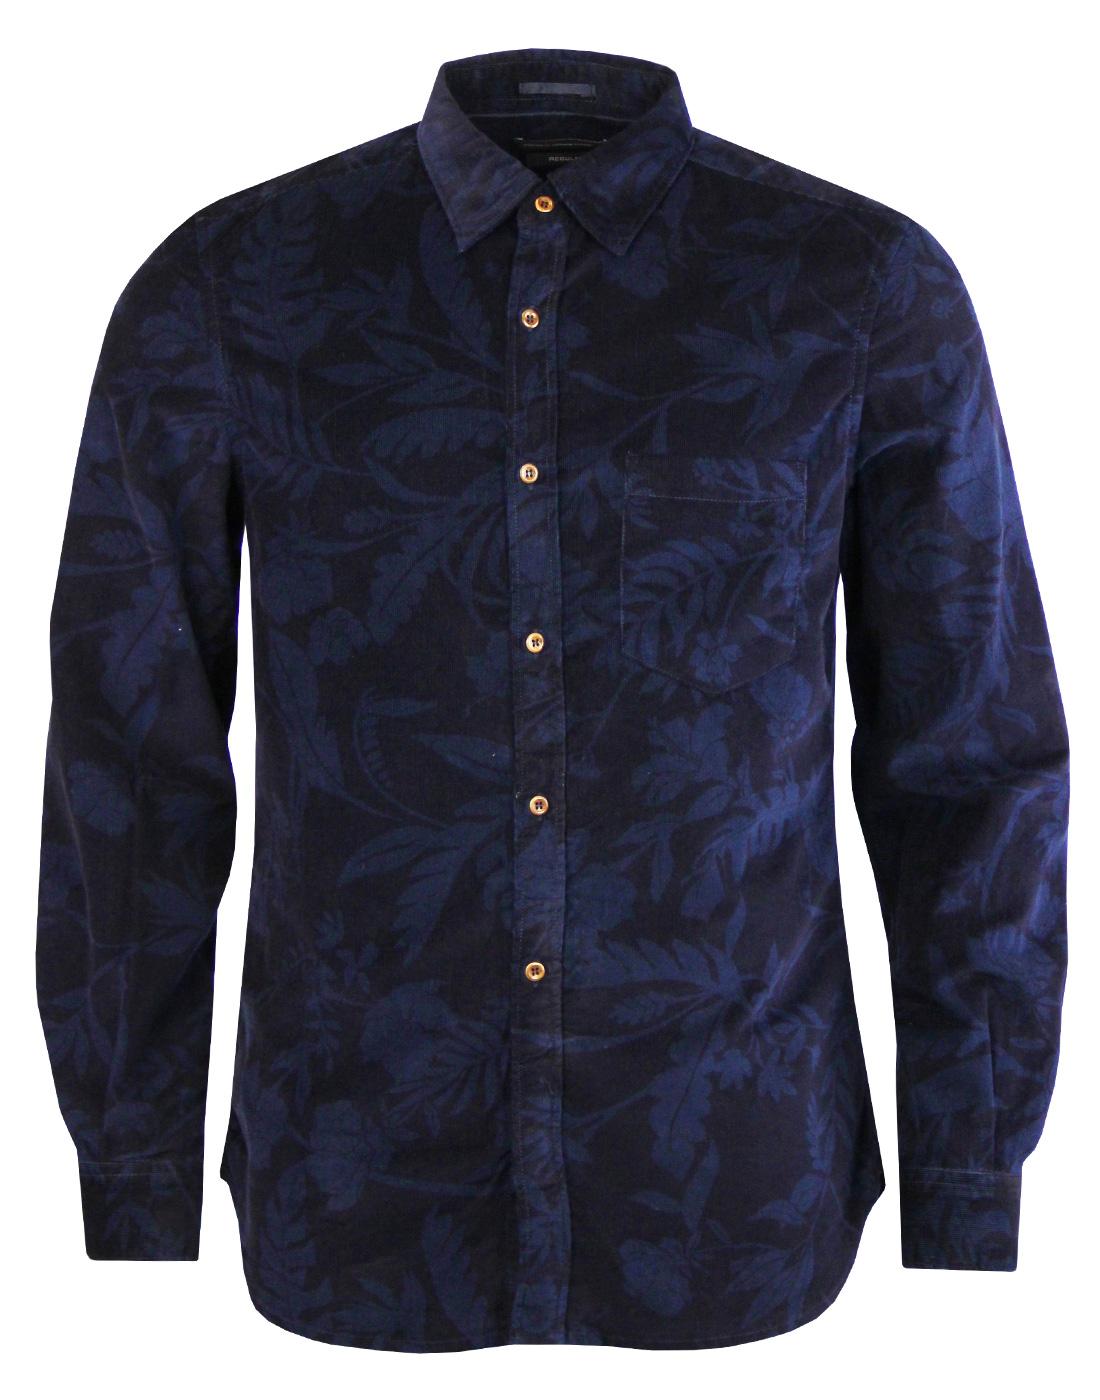 FRENCH CONNECTION Retro Floral Overdye Cord Shirt 